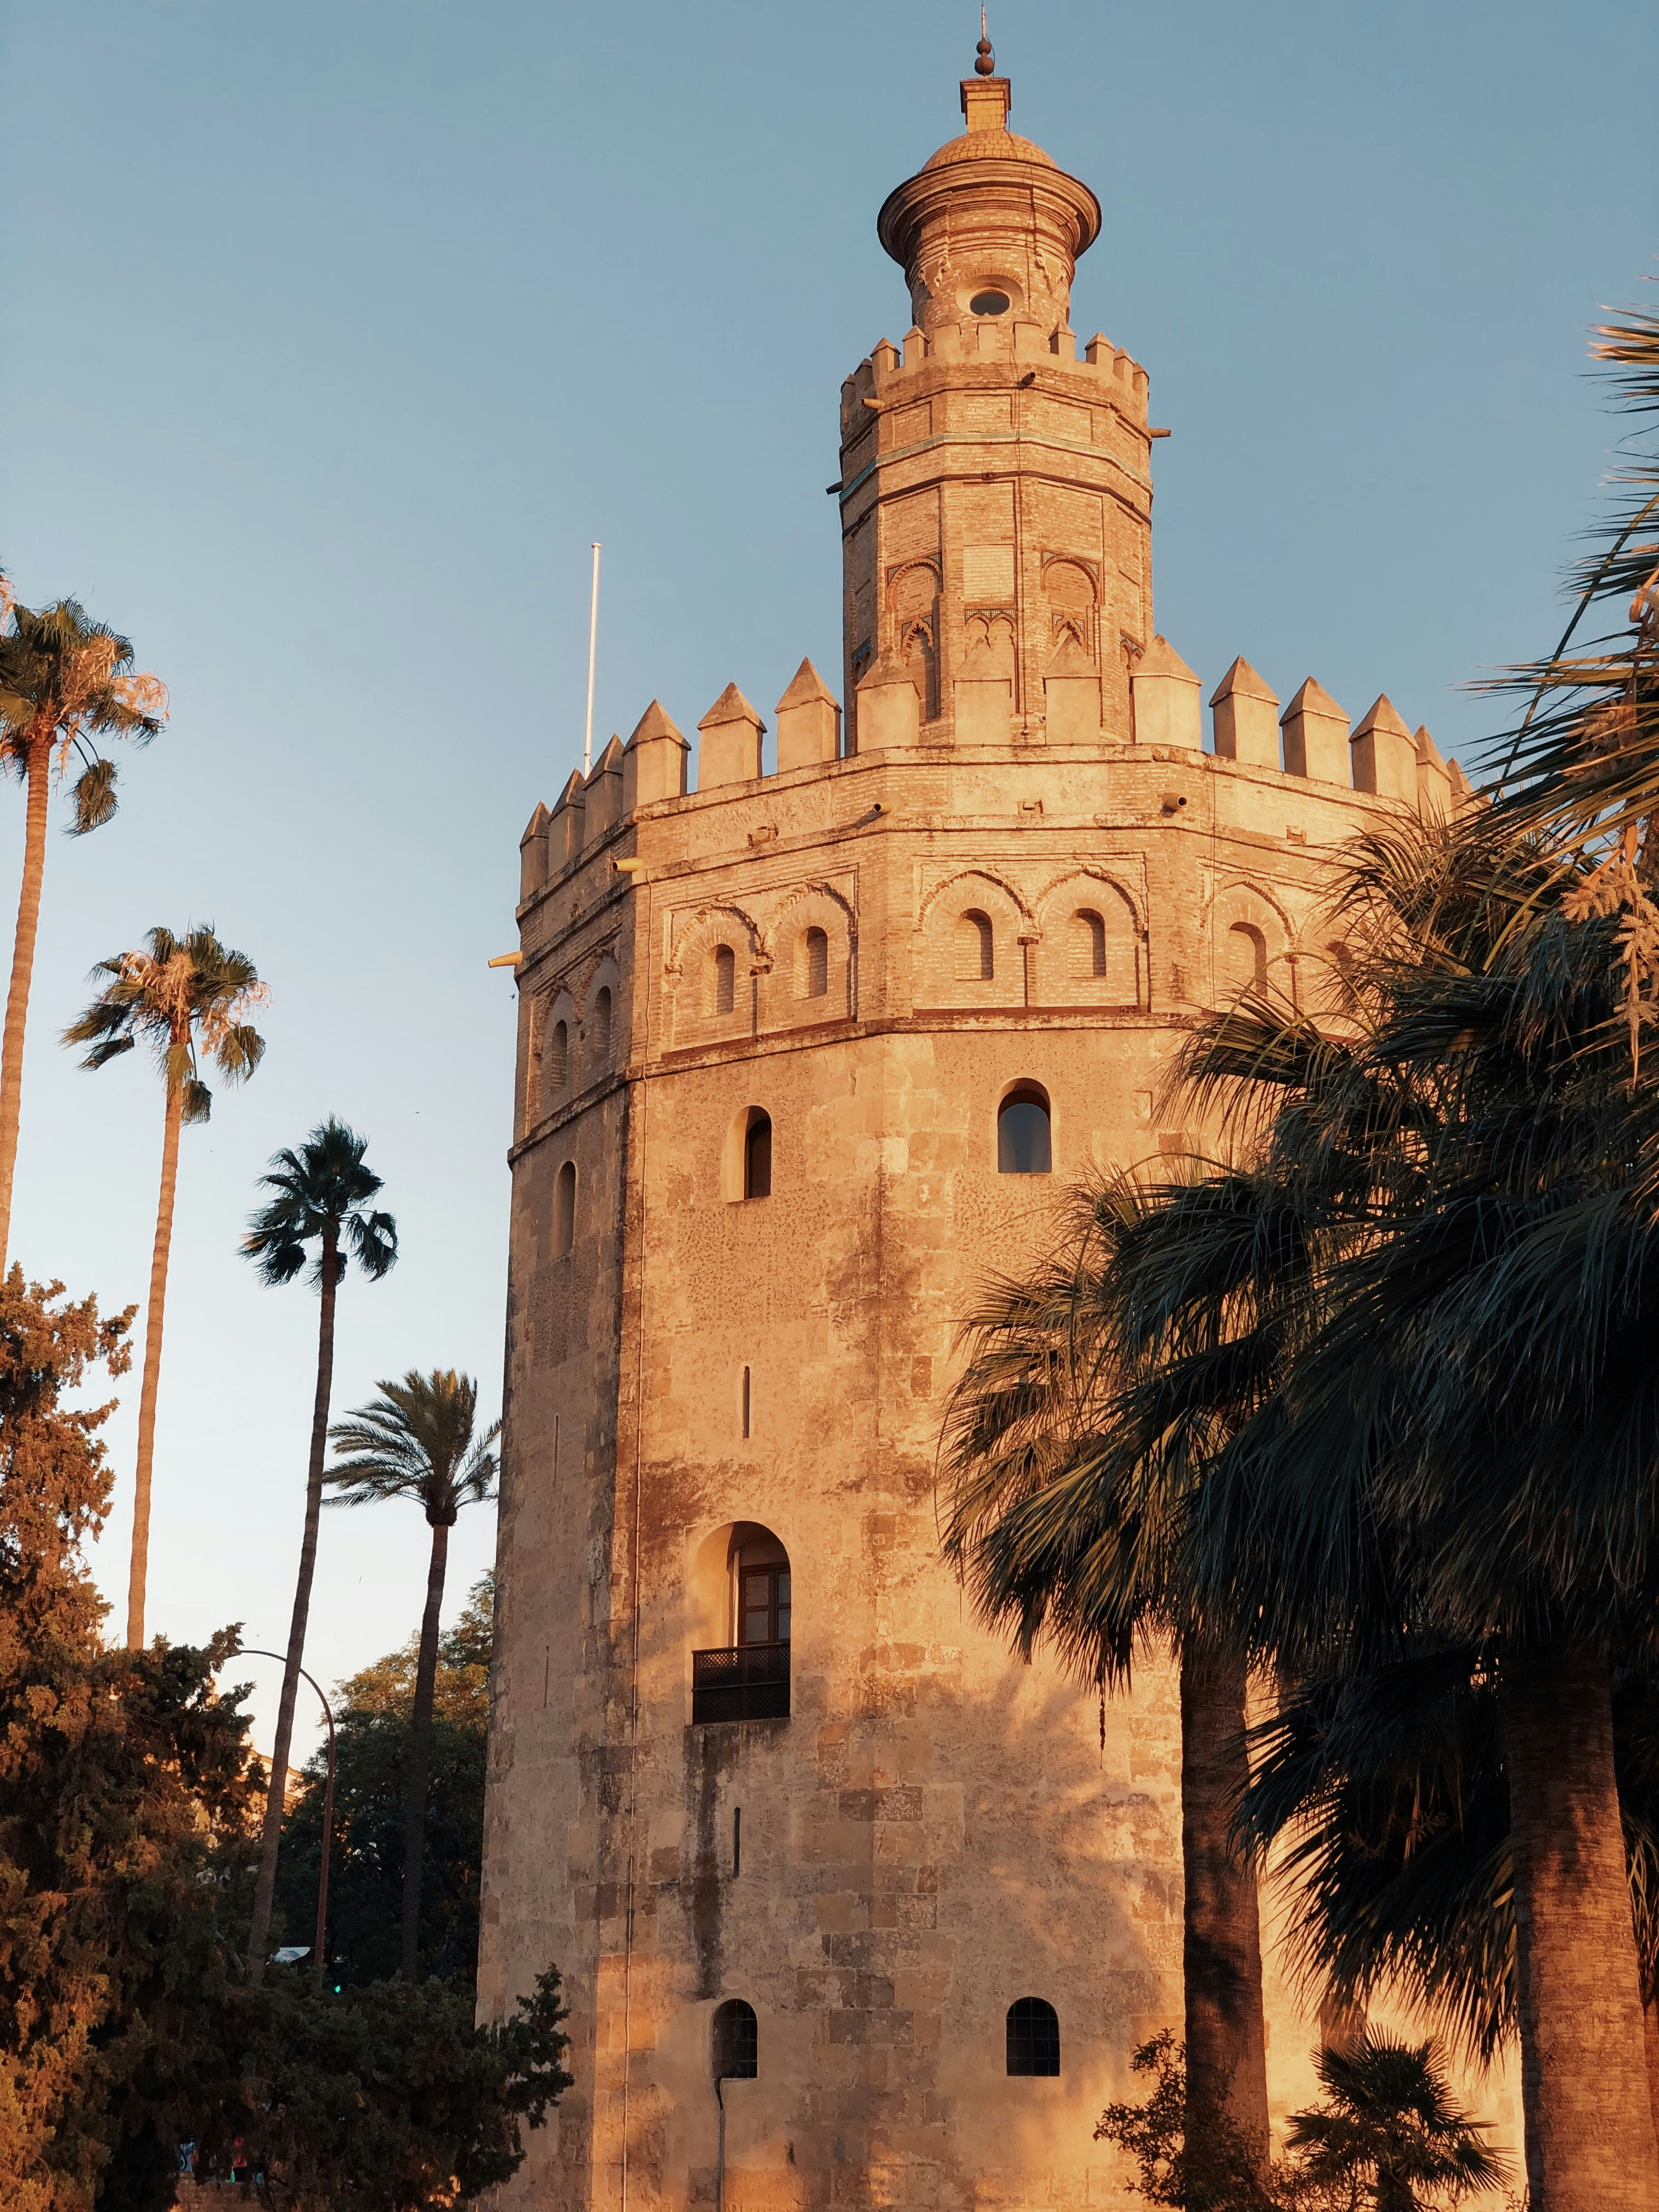 Tower with palm trees and blue skies